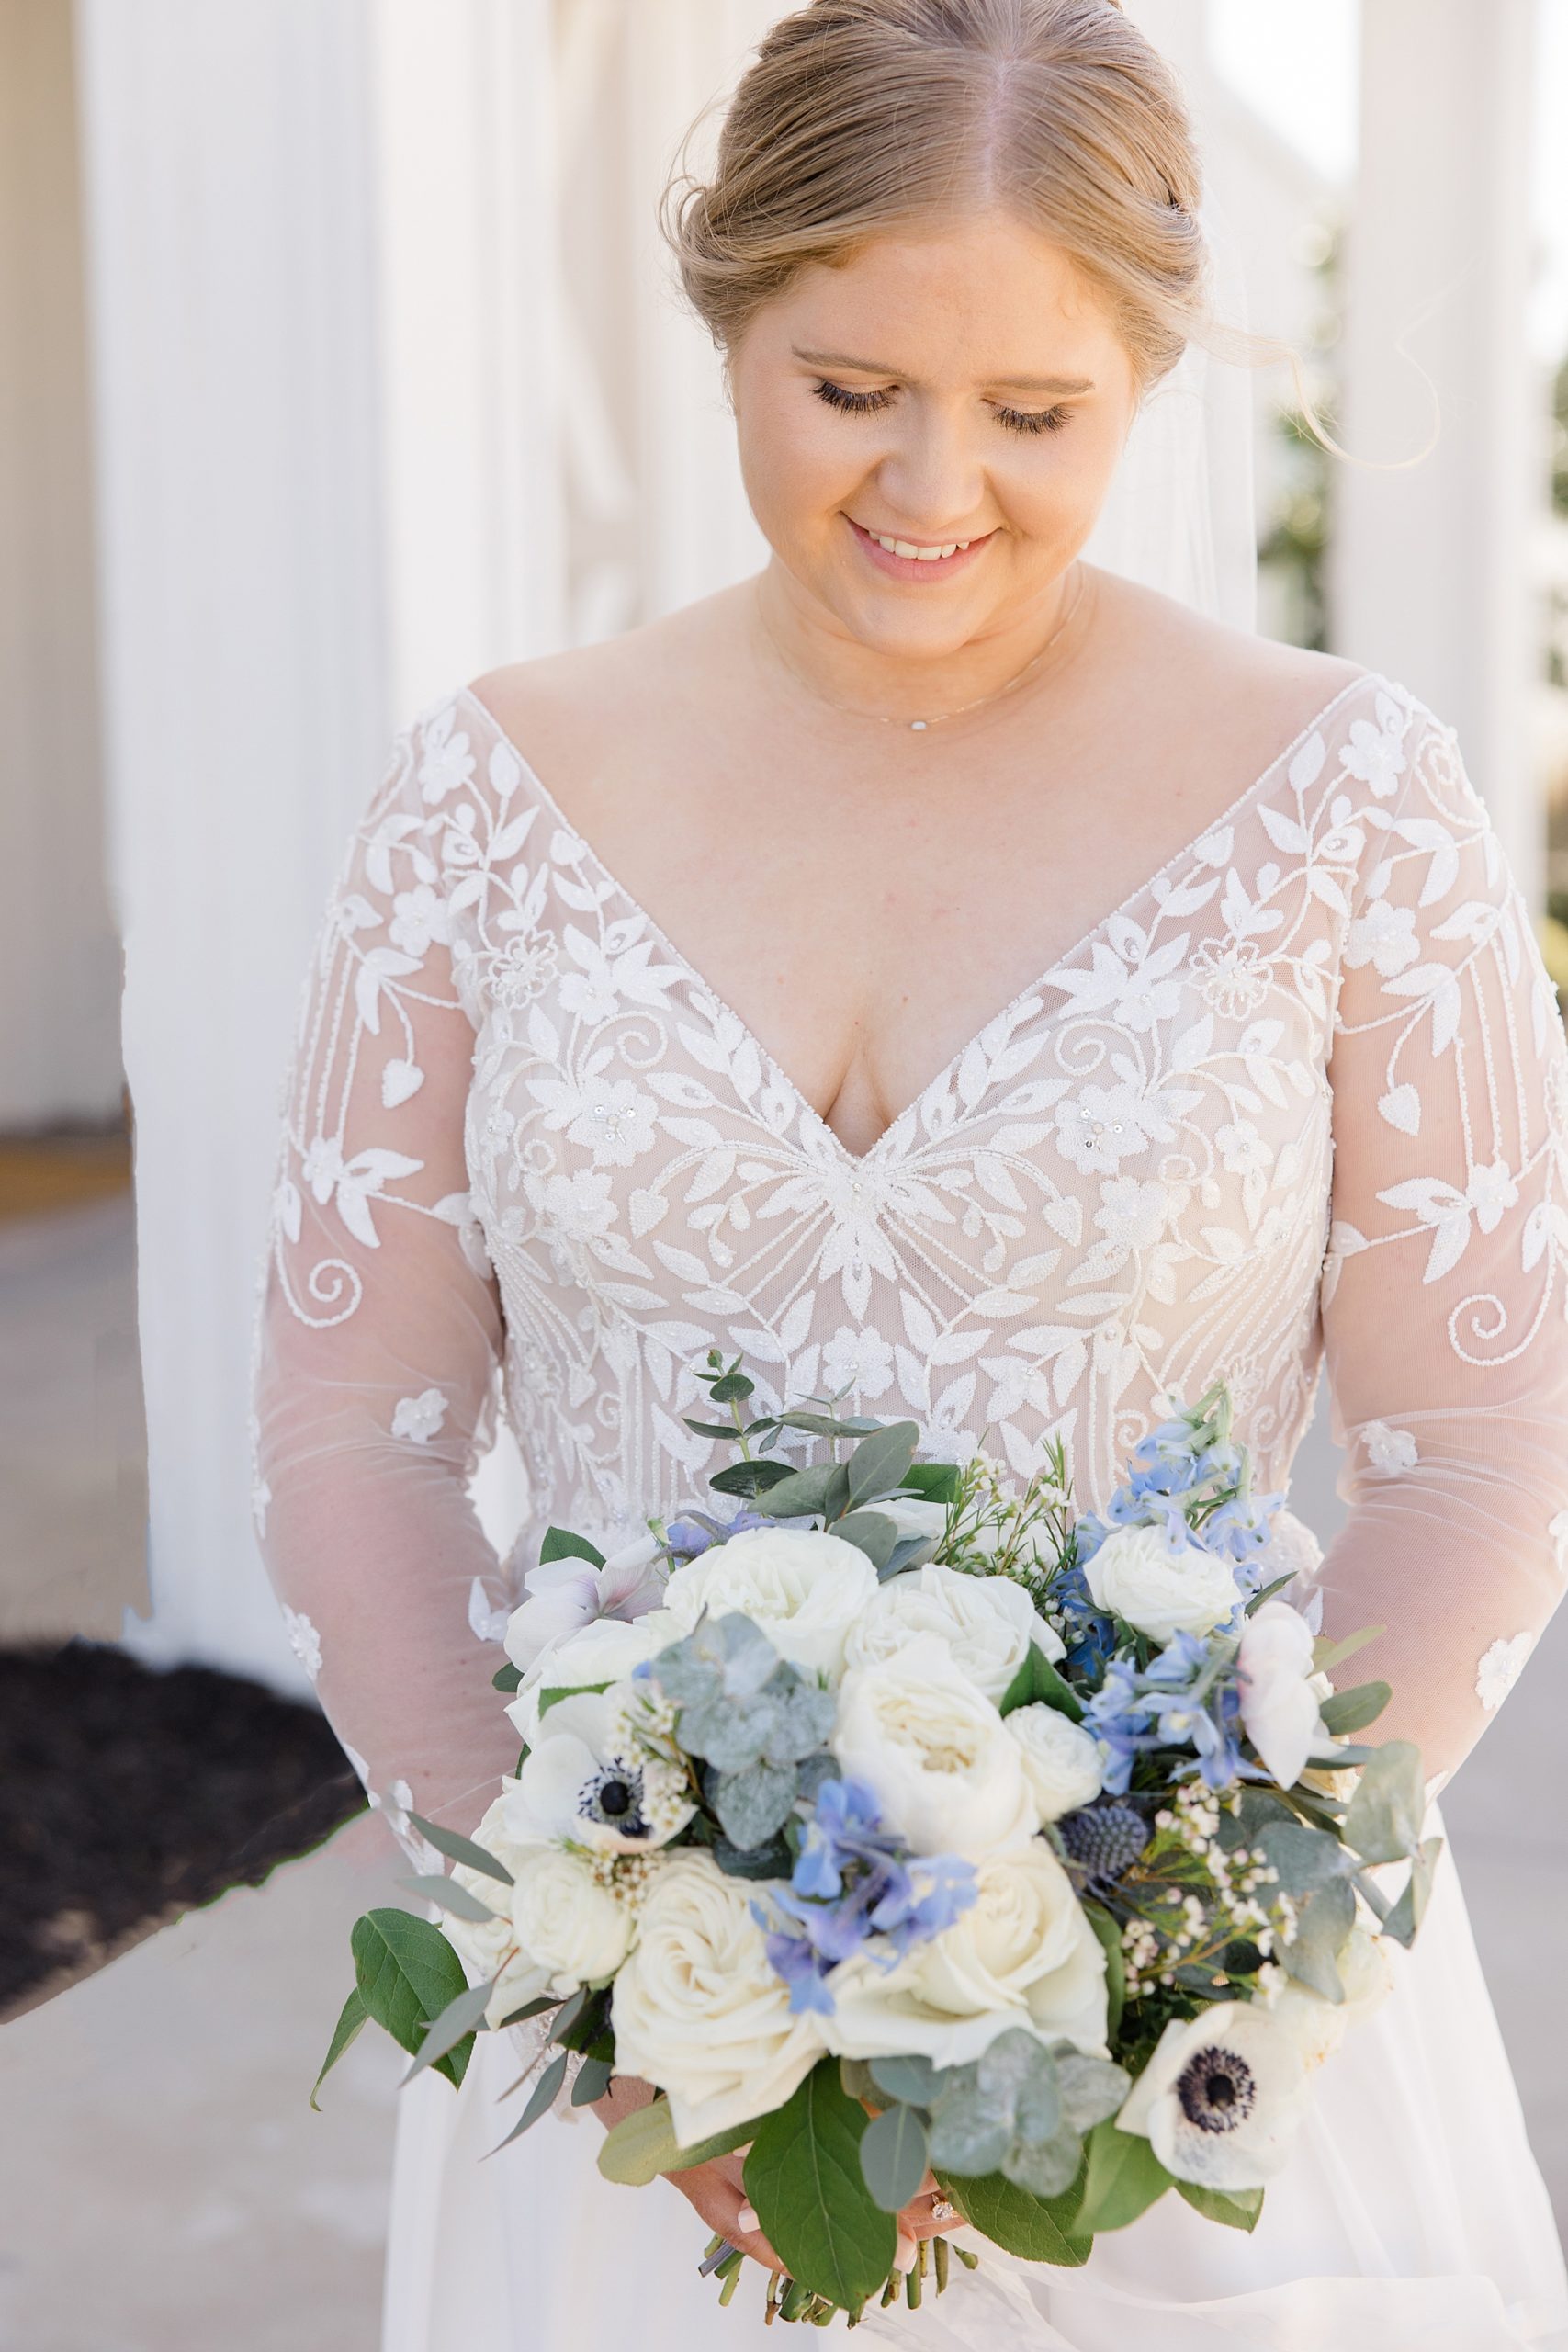 bride in wedding gown with lace sleeves looks down at spring bouquet